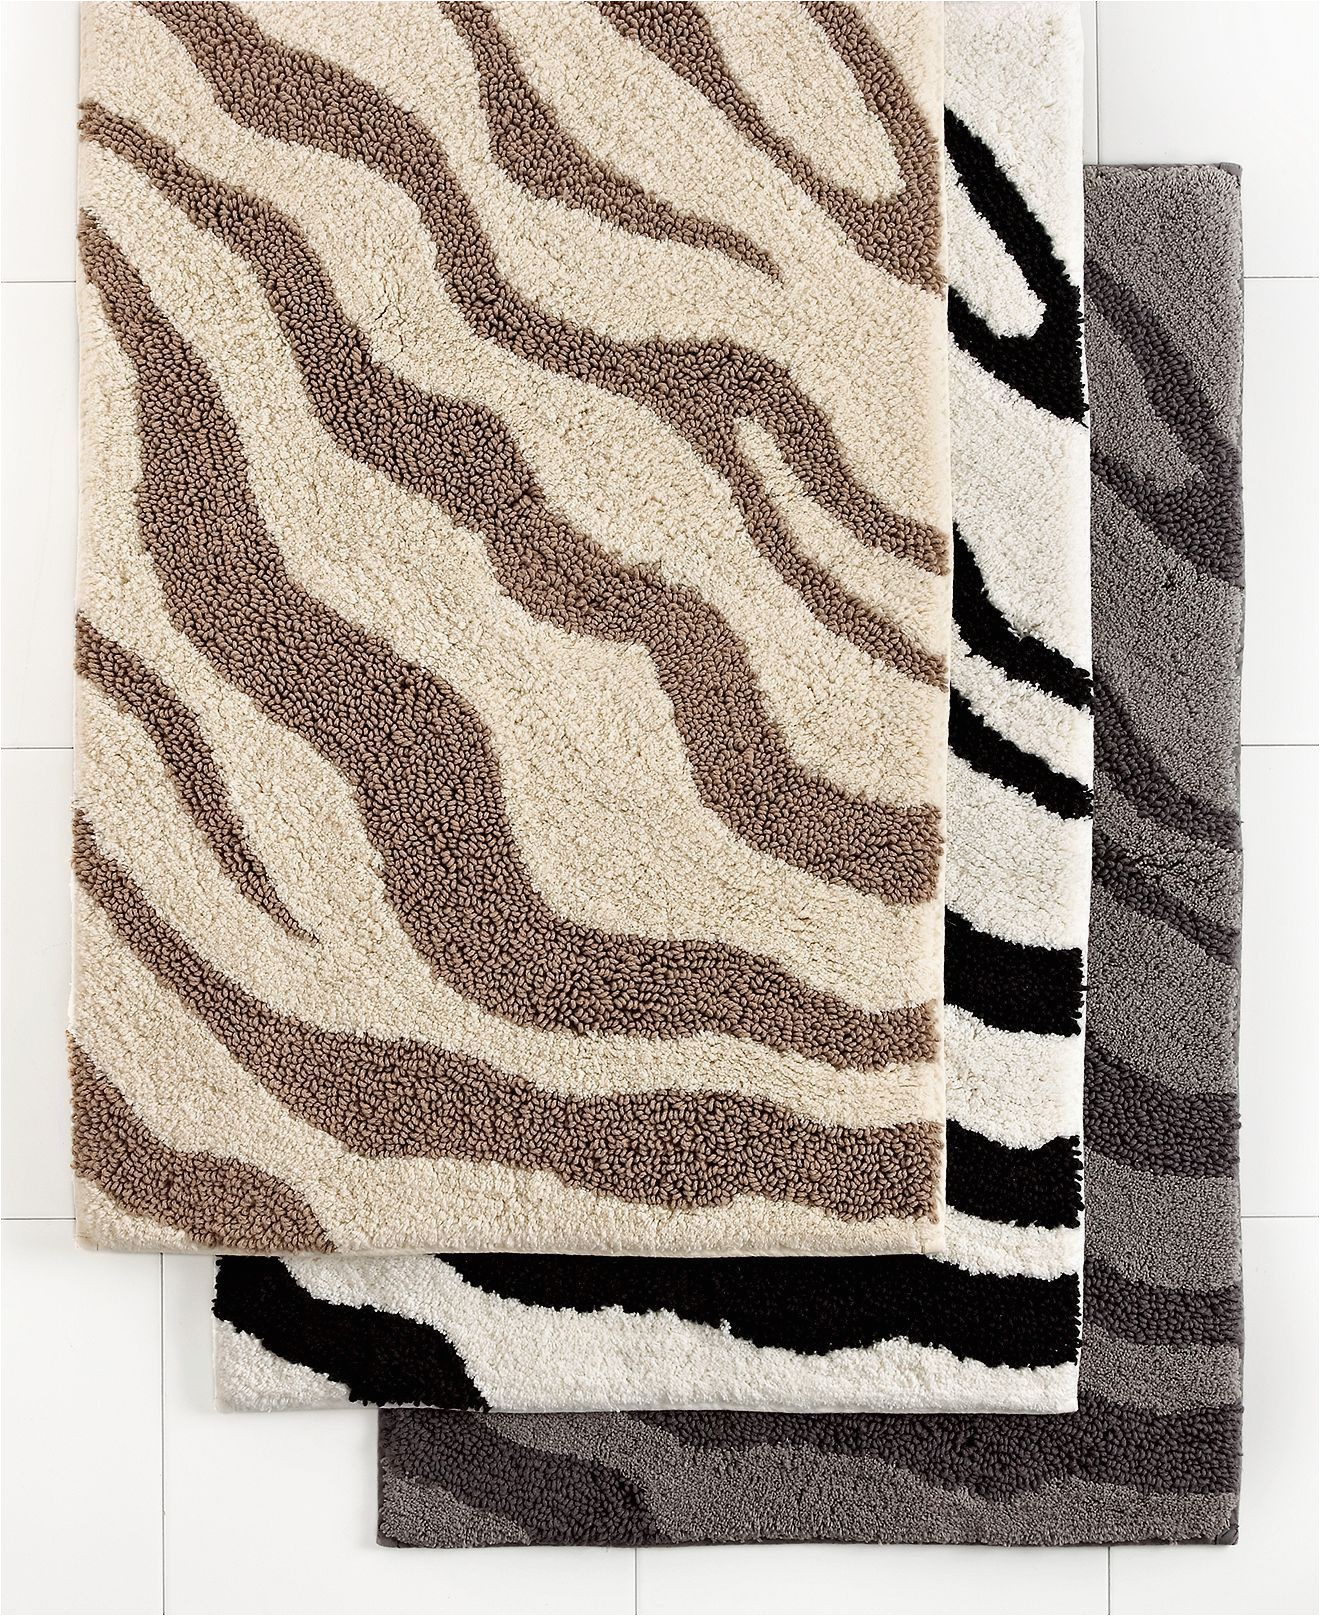 Jcpenney Red Bathroom Rugs Closeout Charter Club Zebra Bath Rug Collection & Reviews